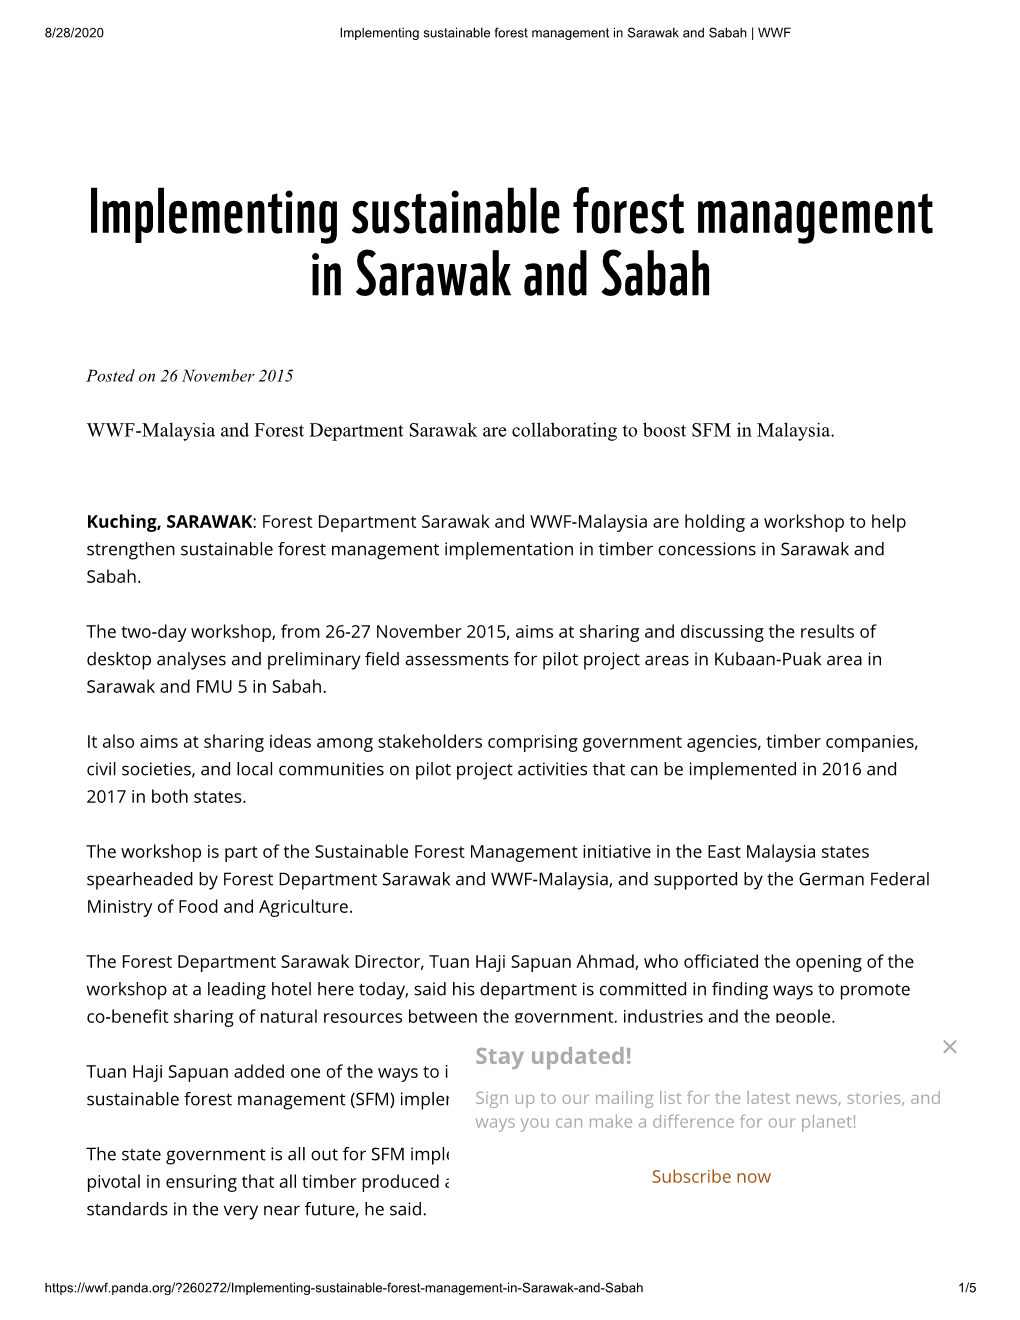 Implementing Sustainable Forest Management in Sarawak and Sabah | WWF